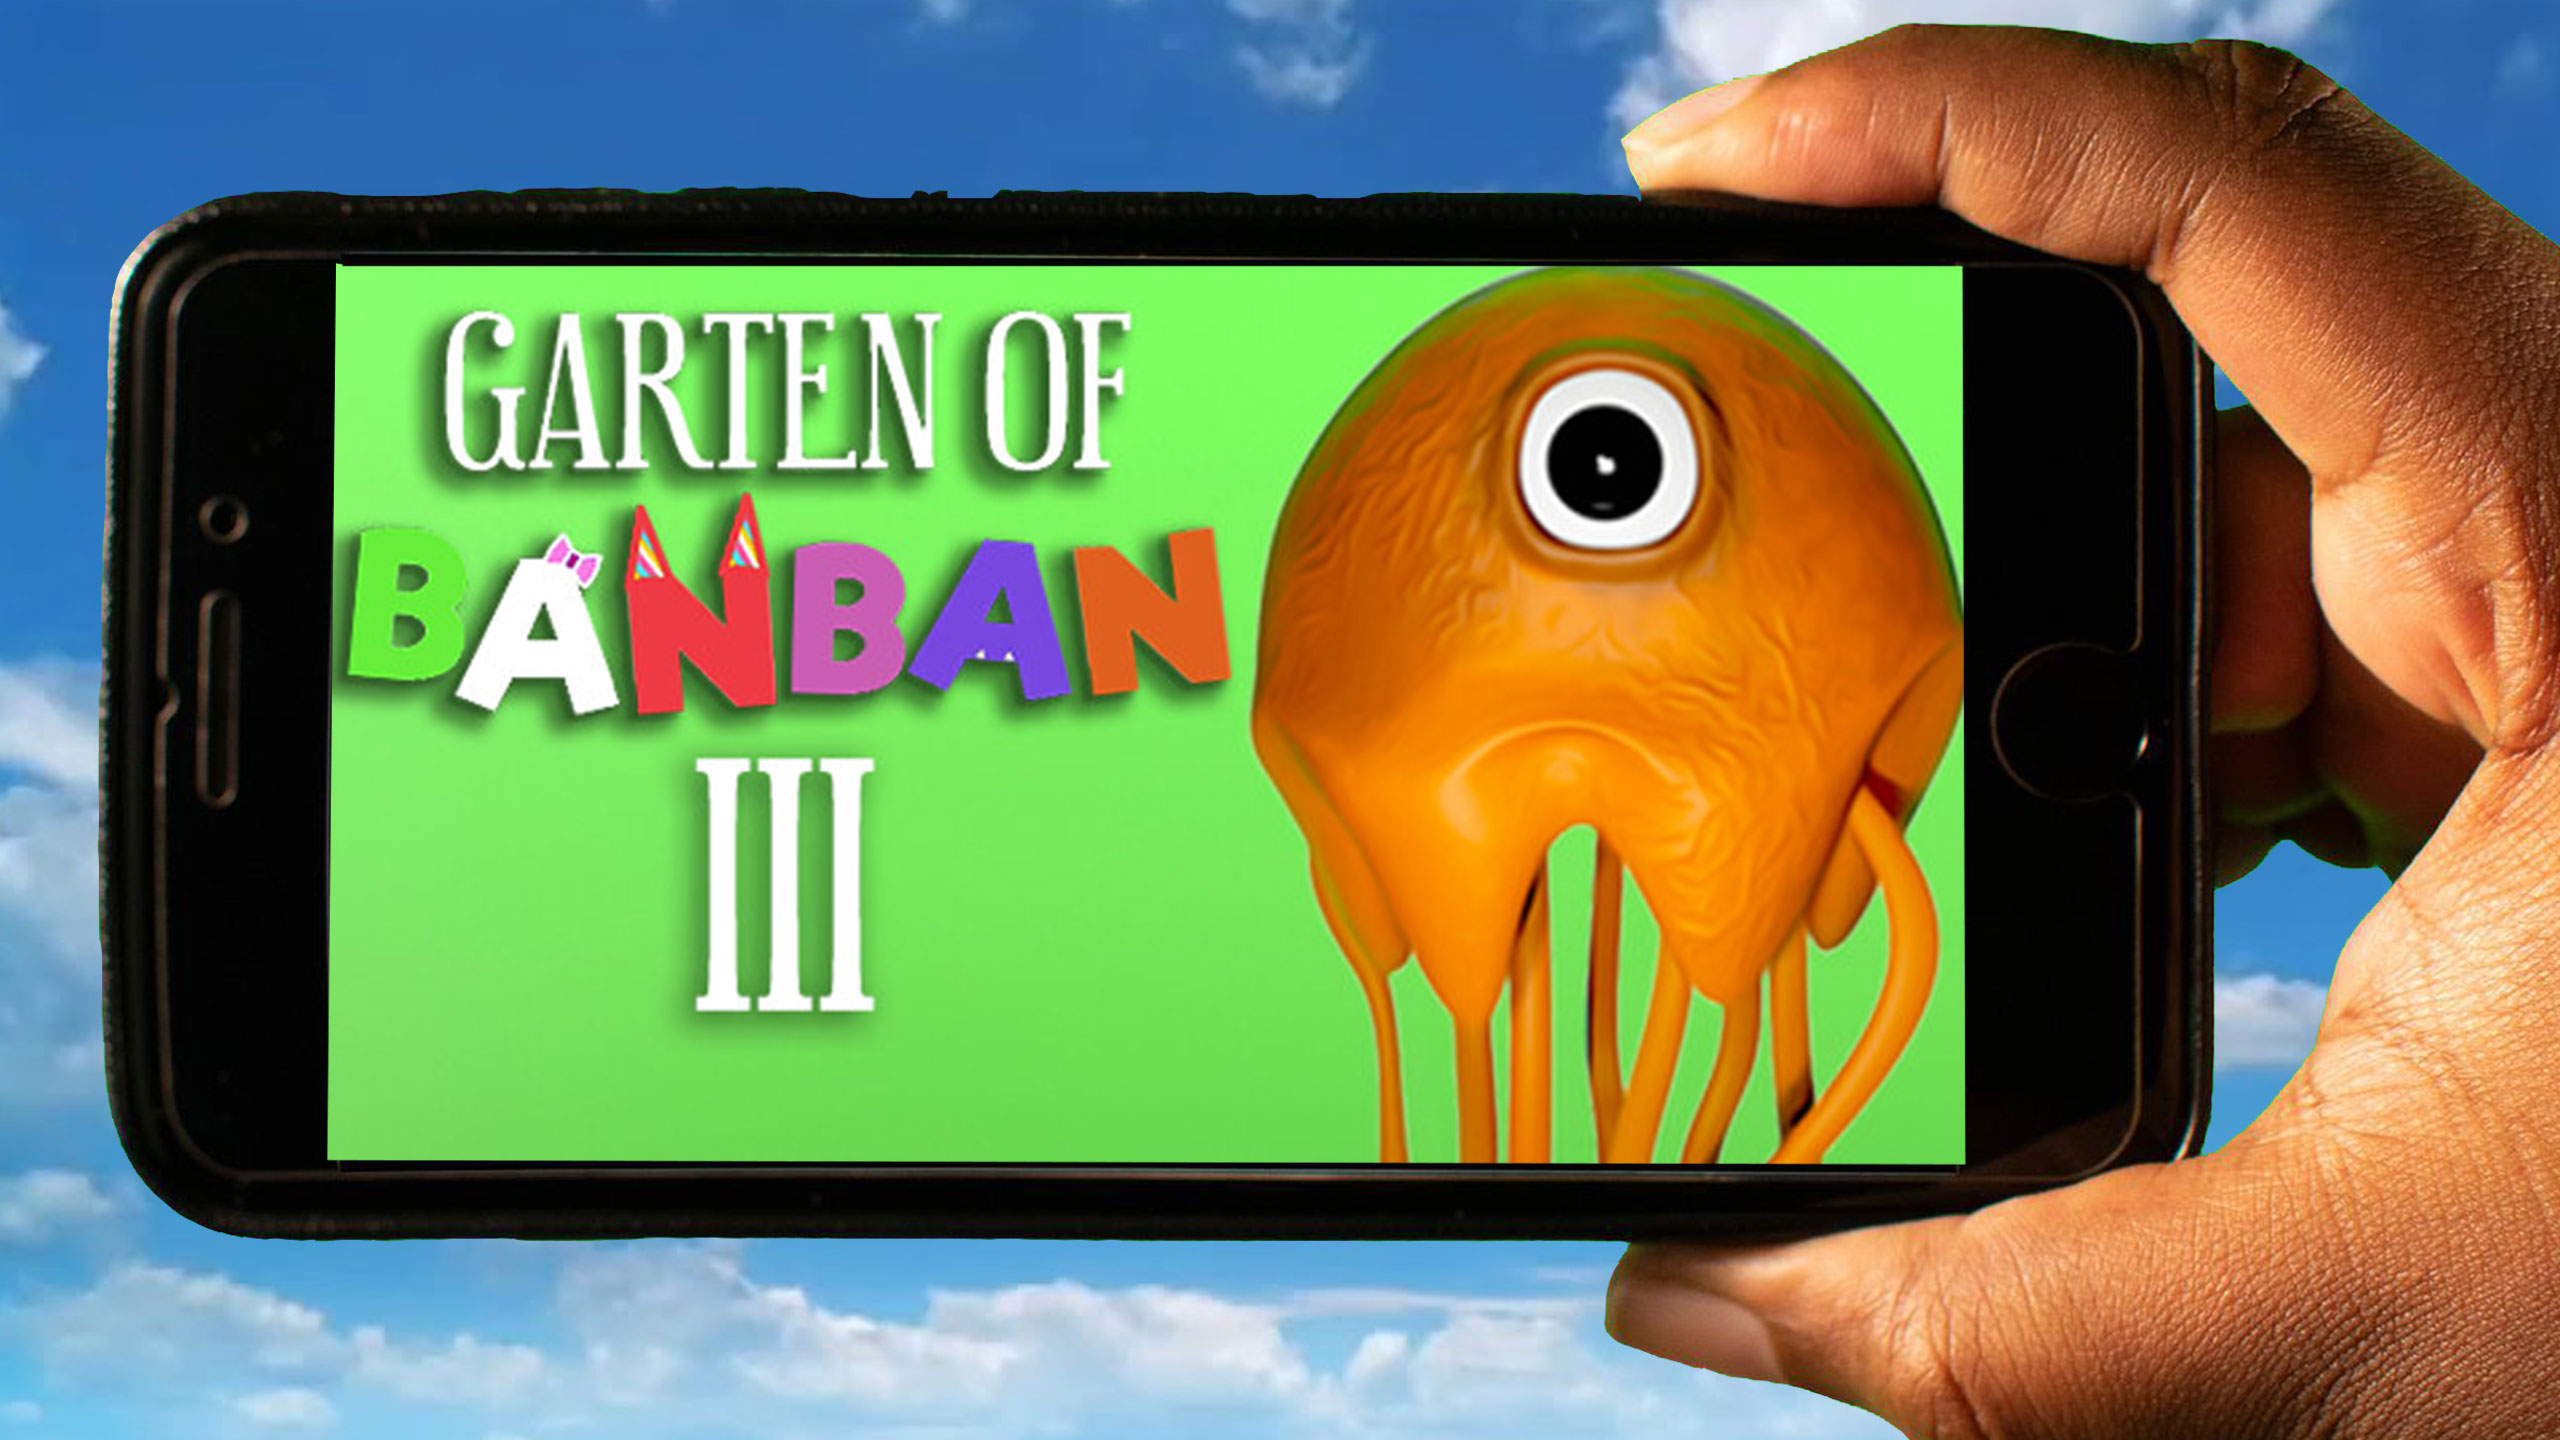 How to Download and Play Garten of Banban 3 Mod Apk on Android